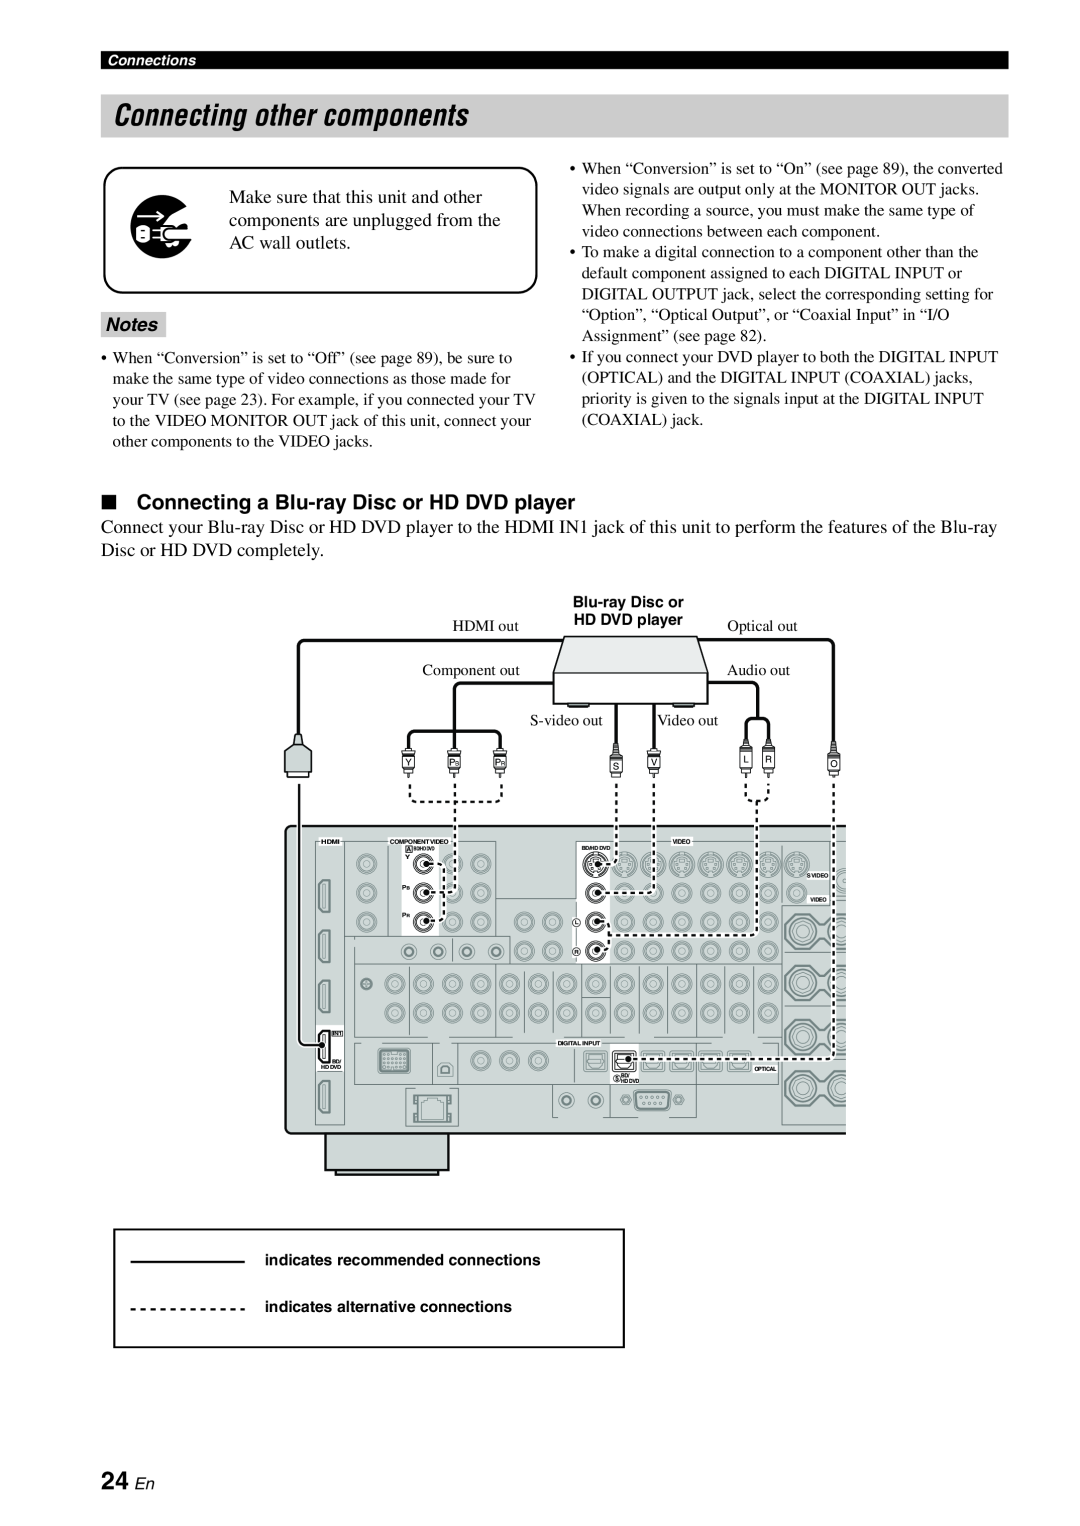 Yamaha RX-V3800 owner manual Connecting other components, 24 En, Connecting a Blu-ray Disc or HD DVD player 